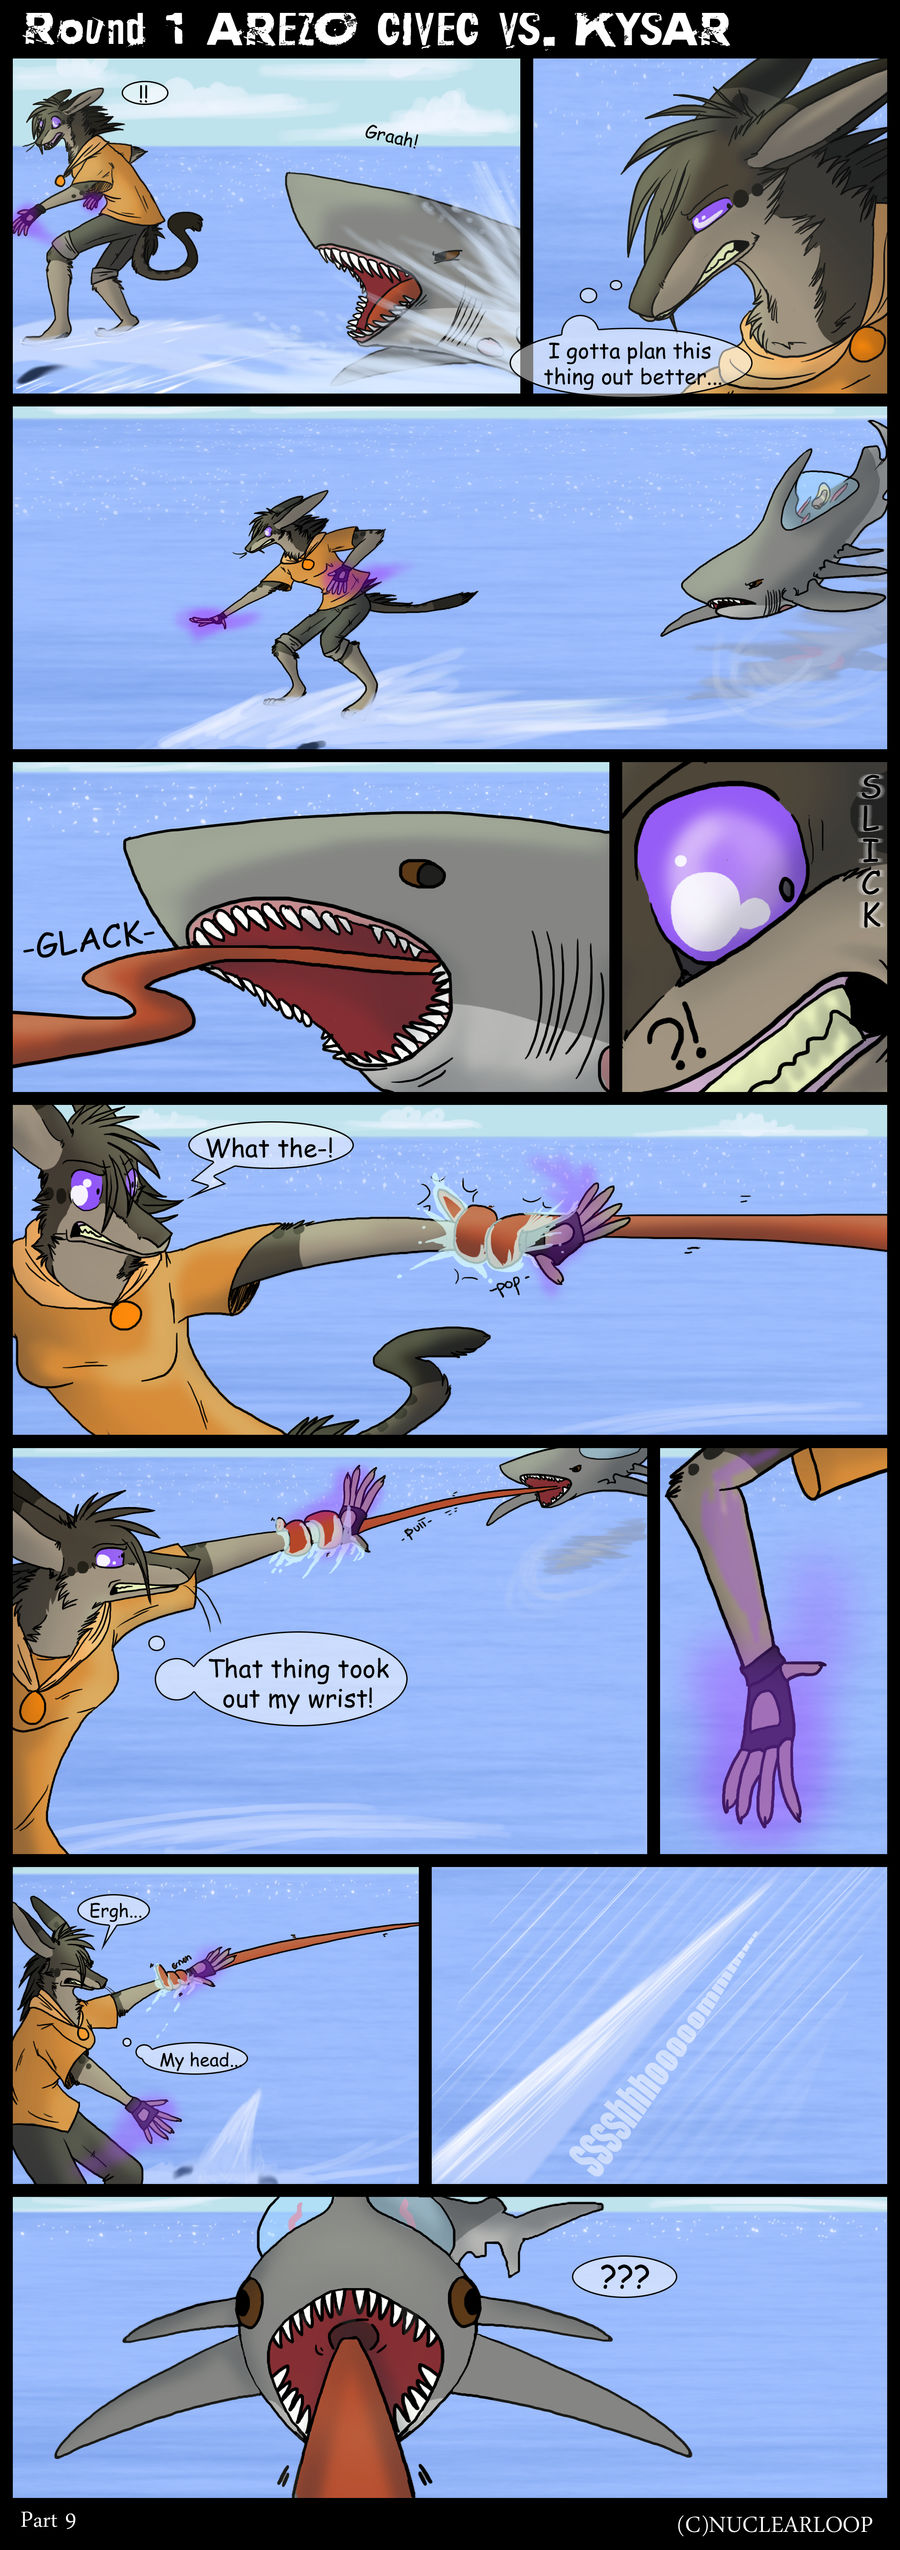 RoA: Round 1 Page 9